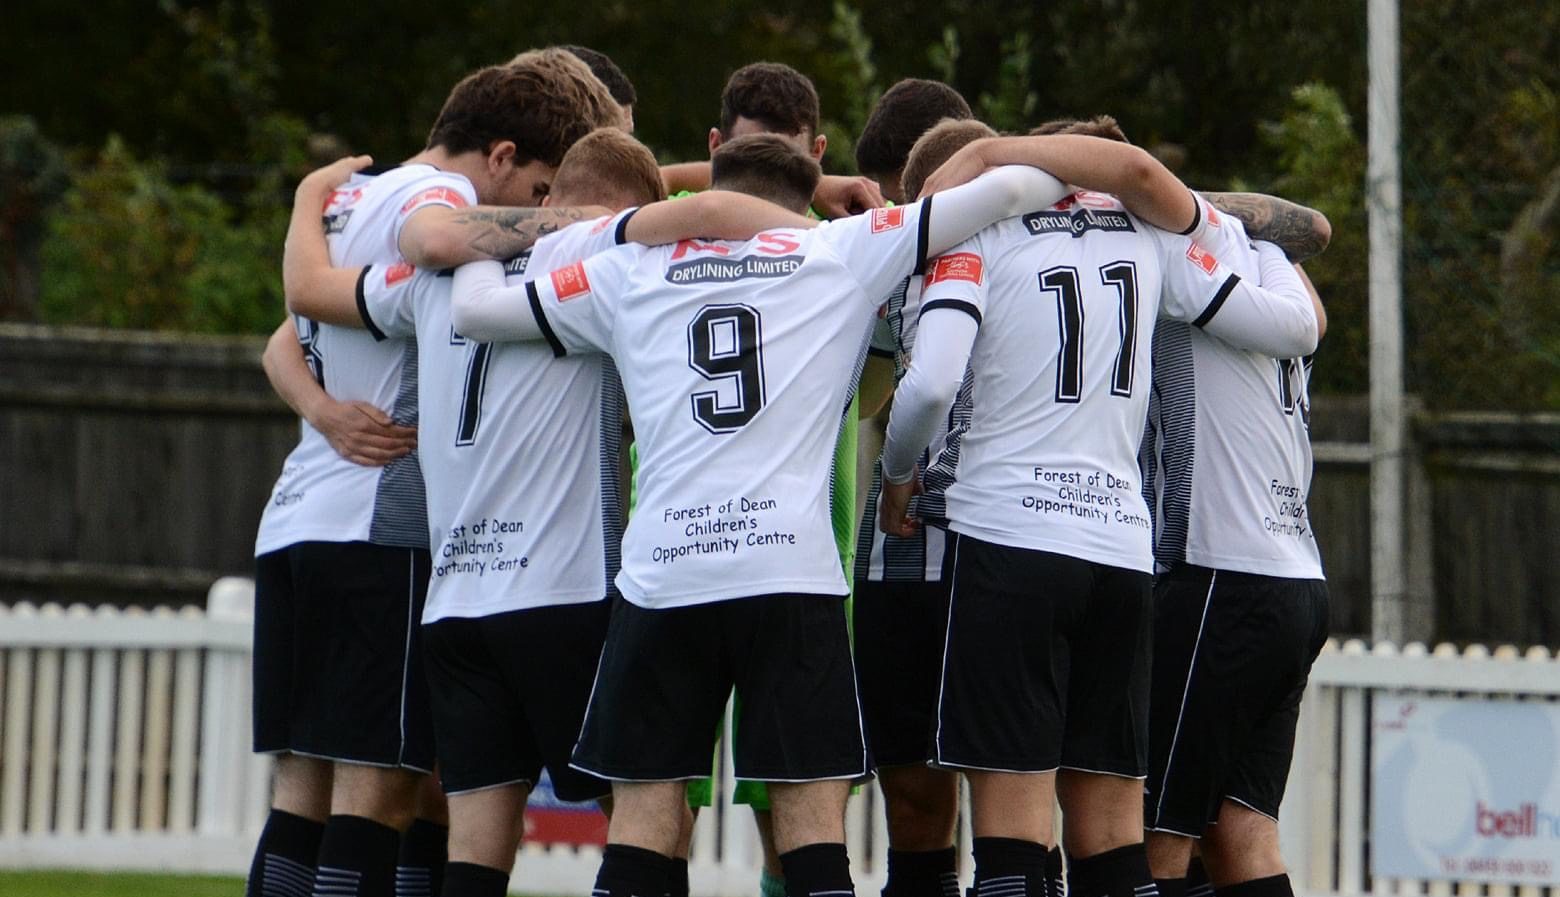 Cinderford Town Football Club - Official website for Cinderford Town AFC